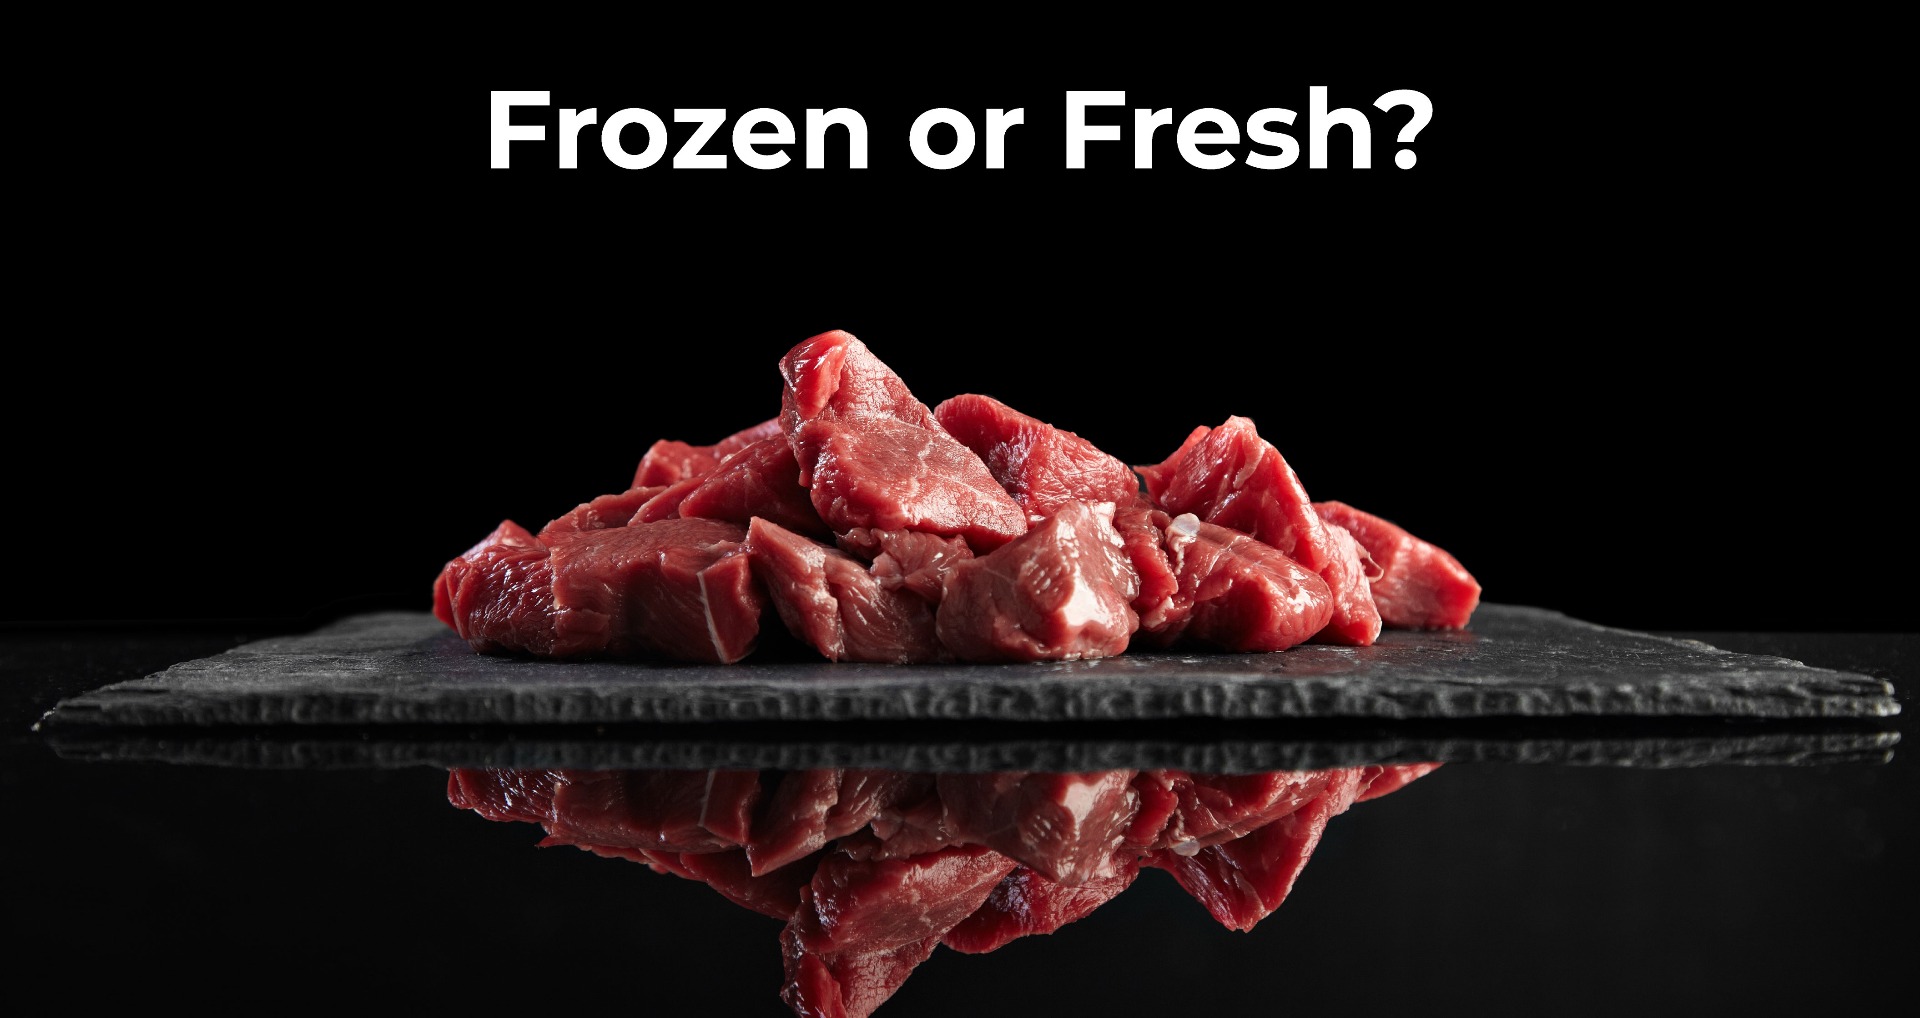 Why Is Frozen Meat Better Than Fresh